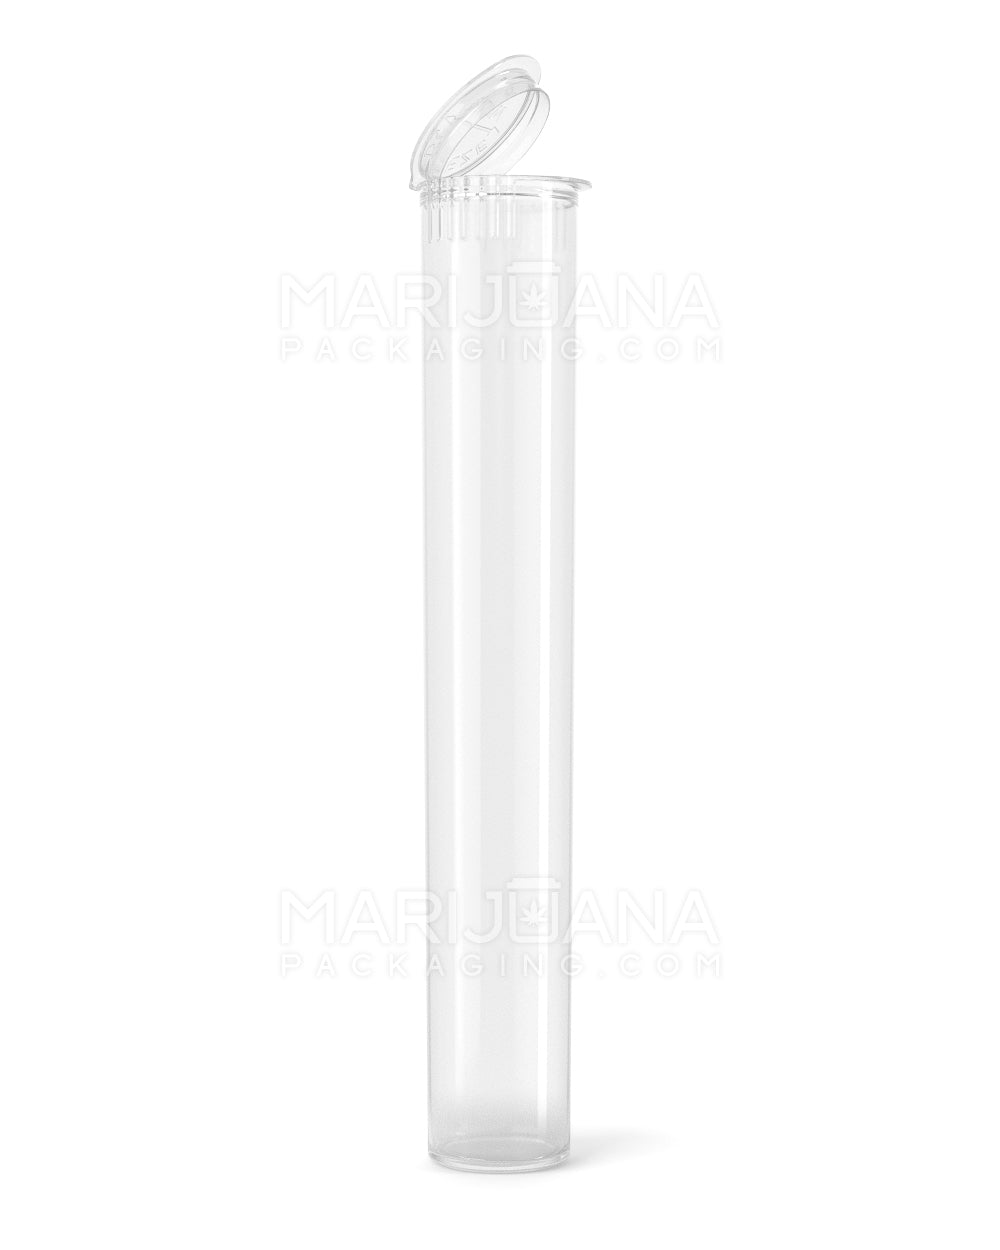 Child Resistant | King Size Pop Top Plastic PCR Pre-Roll Tubes (Open) | 116mm - Clear - 1000 Count - 1